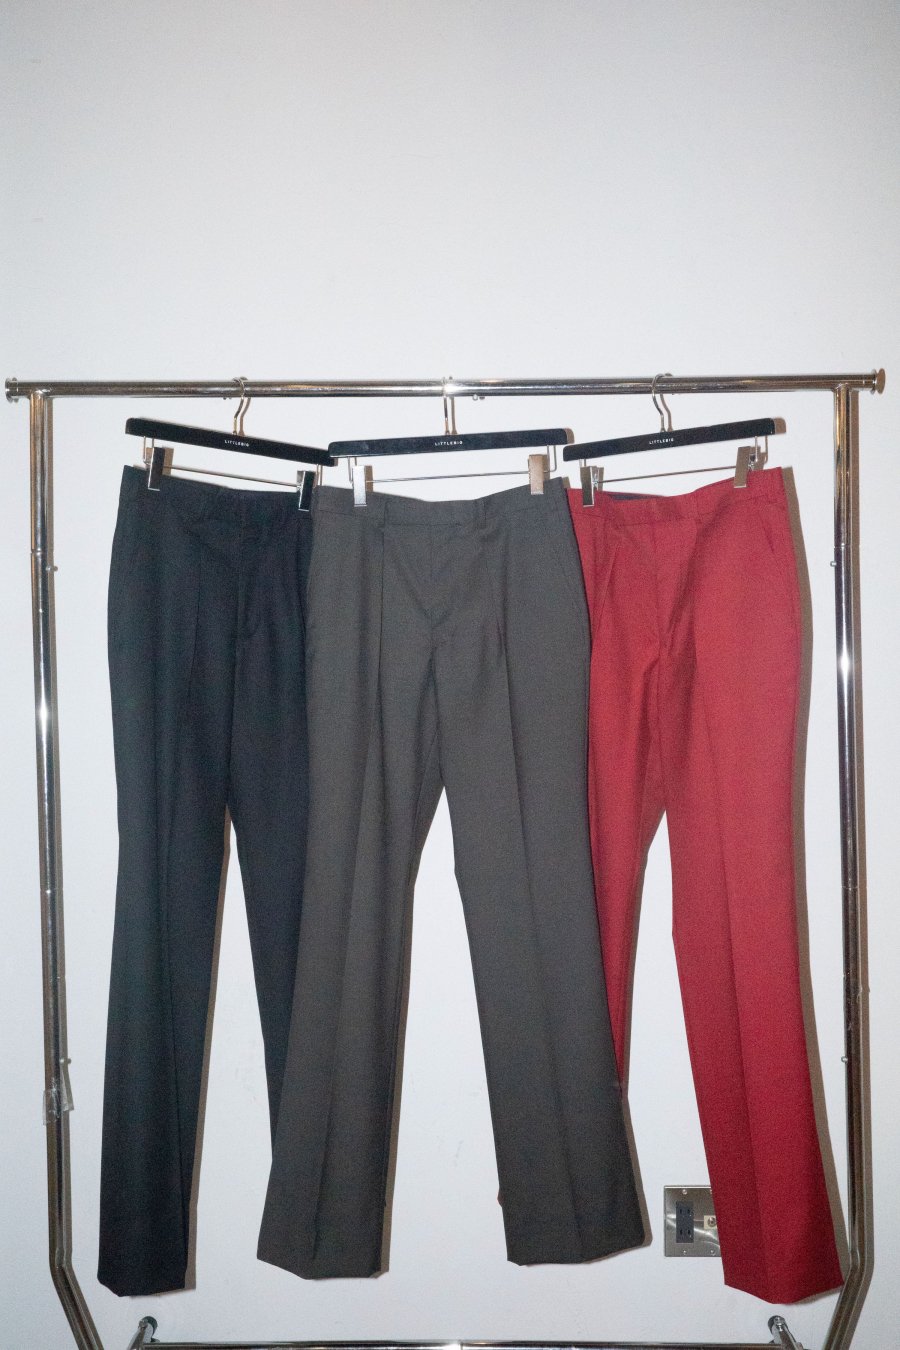 LITTLEBIG  Plain Trousers(Black)<img class='new_mark_img2' src='https://img.shop-pro.jp/img/new/icons15.gif' style='border:none;display:inline;margin:0px;padding:0px;width:auto;' />